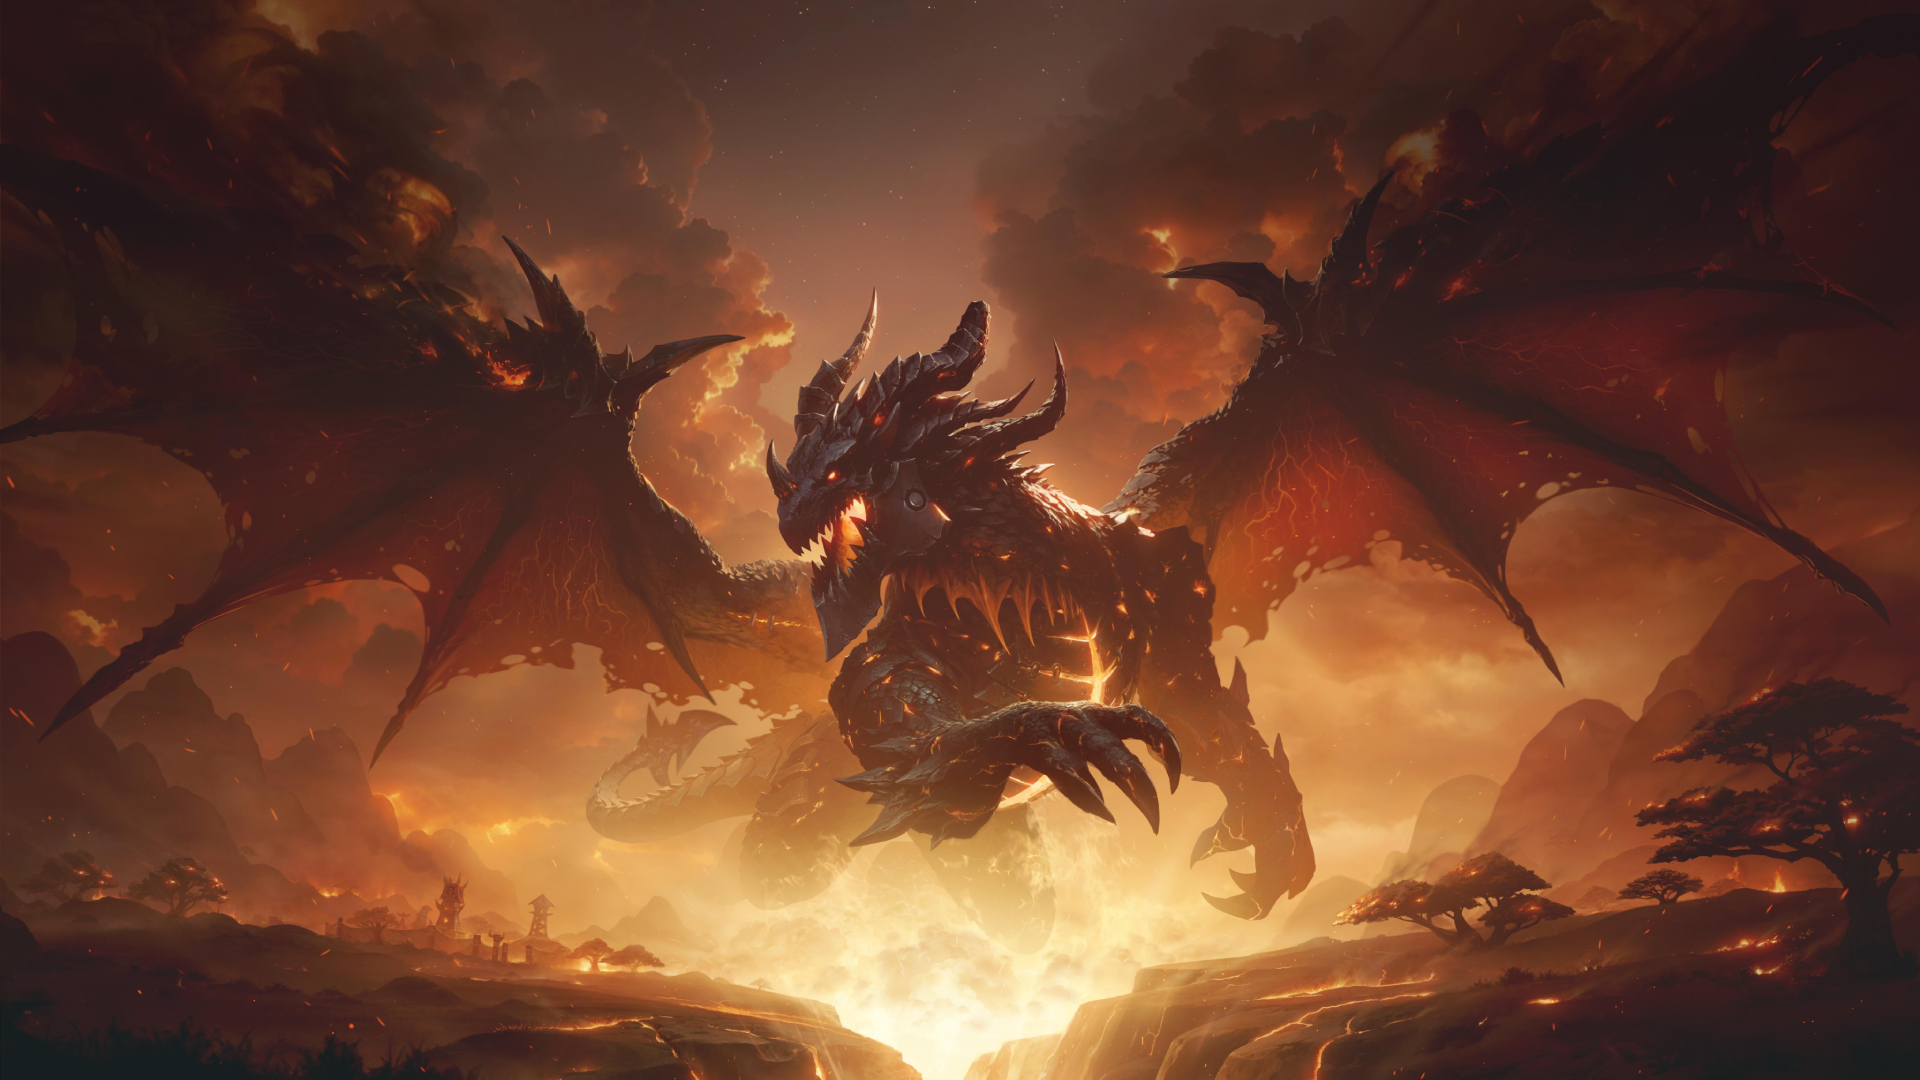 Warcraft Dragon Deathwing Burning World Of Warcraft Cataclysm Video Games Clouds Video Game Characte 1920x1080